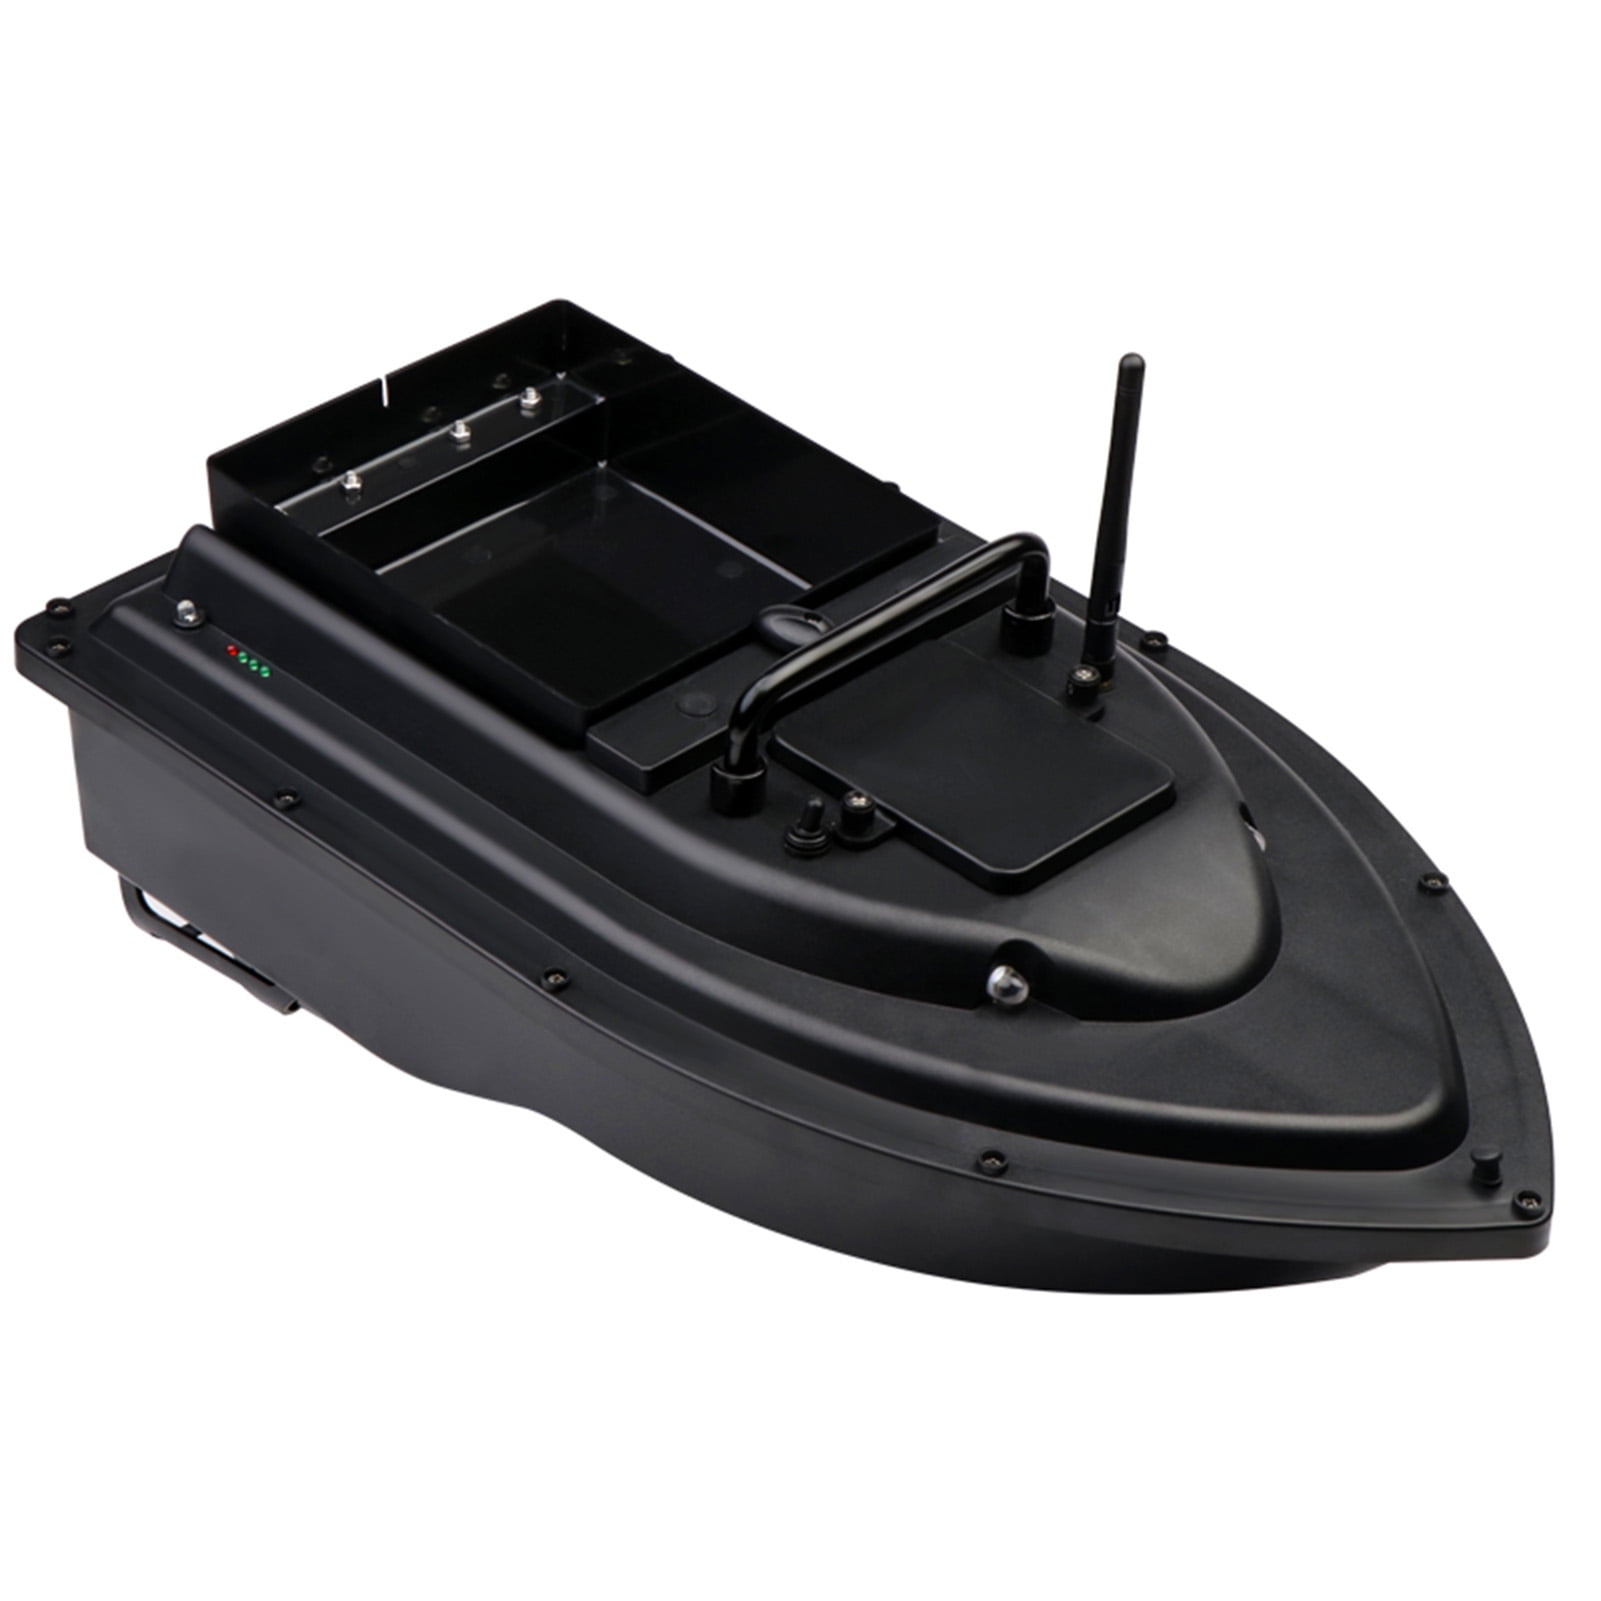  HENGGE Rc Boat Bait Boat GPS Positioning with Led Night Ligh  Fishing Bait Boat Gifts for Men Fishing,Blue,GPS 5200Mah : Sports & Outdoors